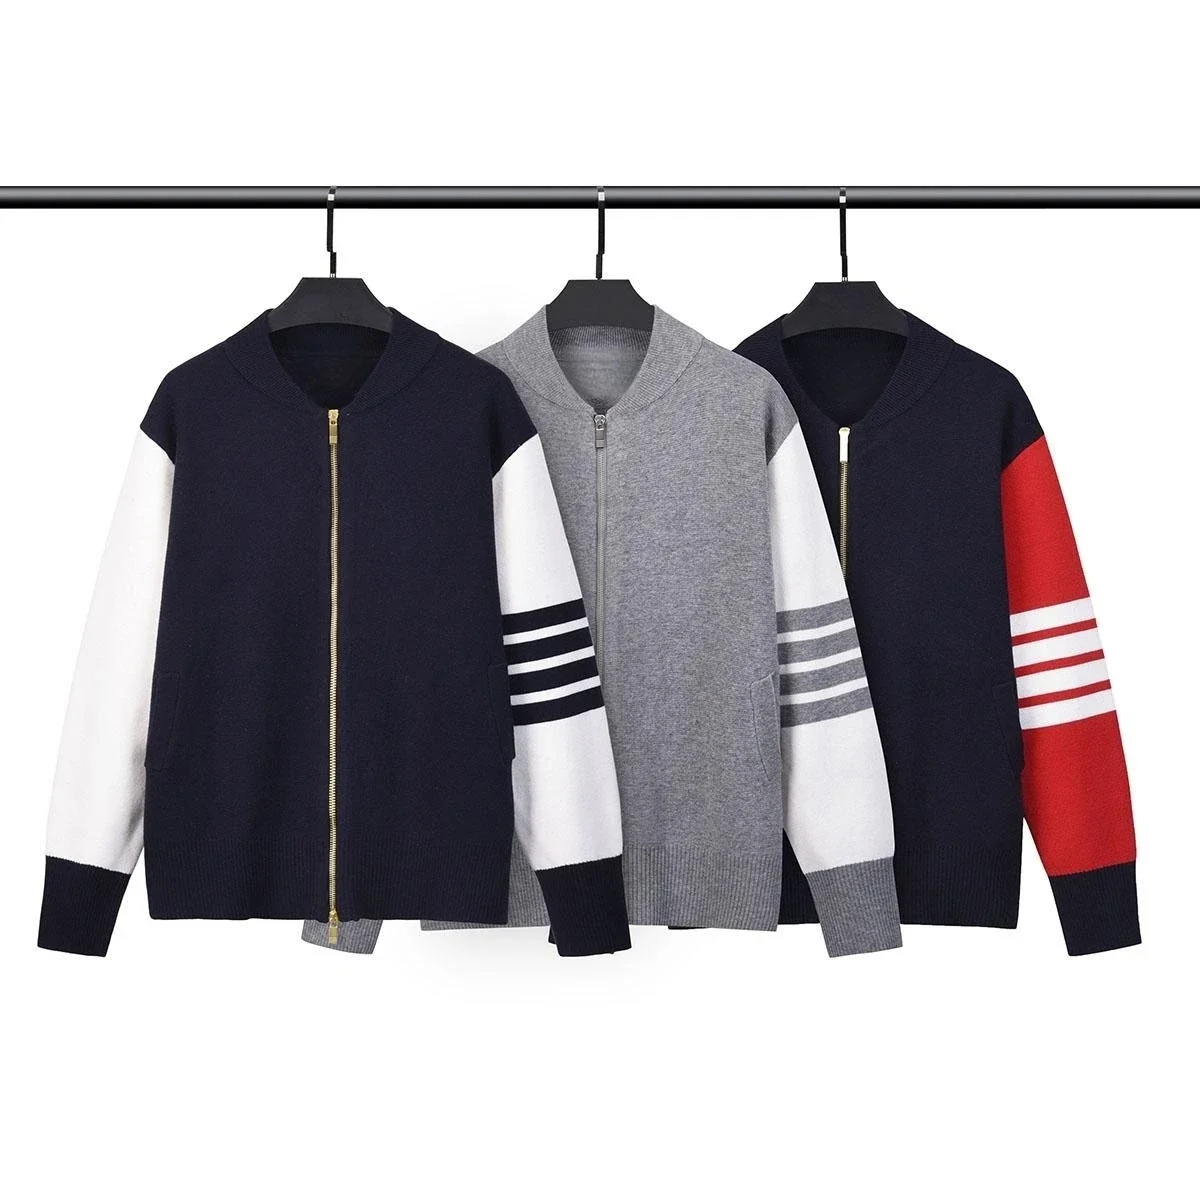 

TB THOM Men's Sweaters 2023 New In Classic Stripes Mixed Color Patchwork Varsity Jackets Casual Streetwear Bomber Jacket Sweater